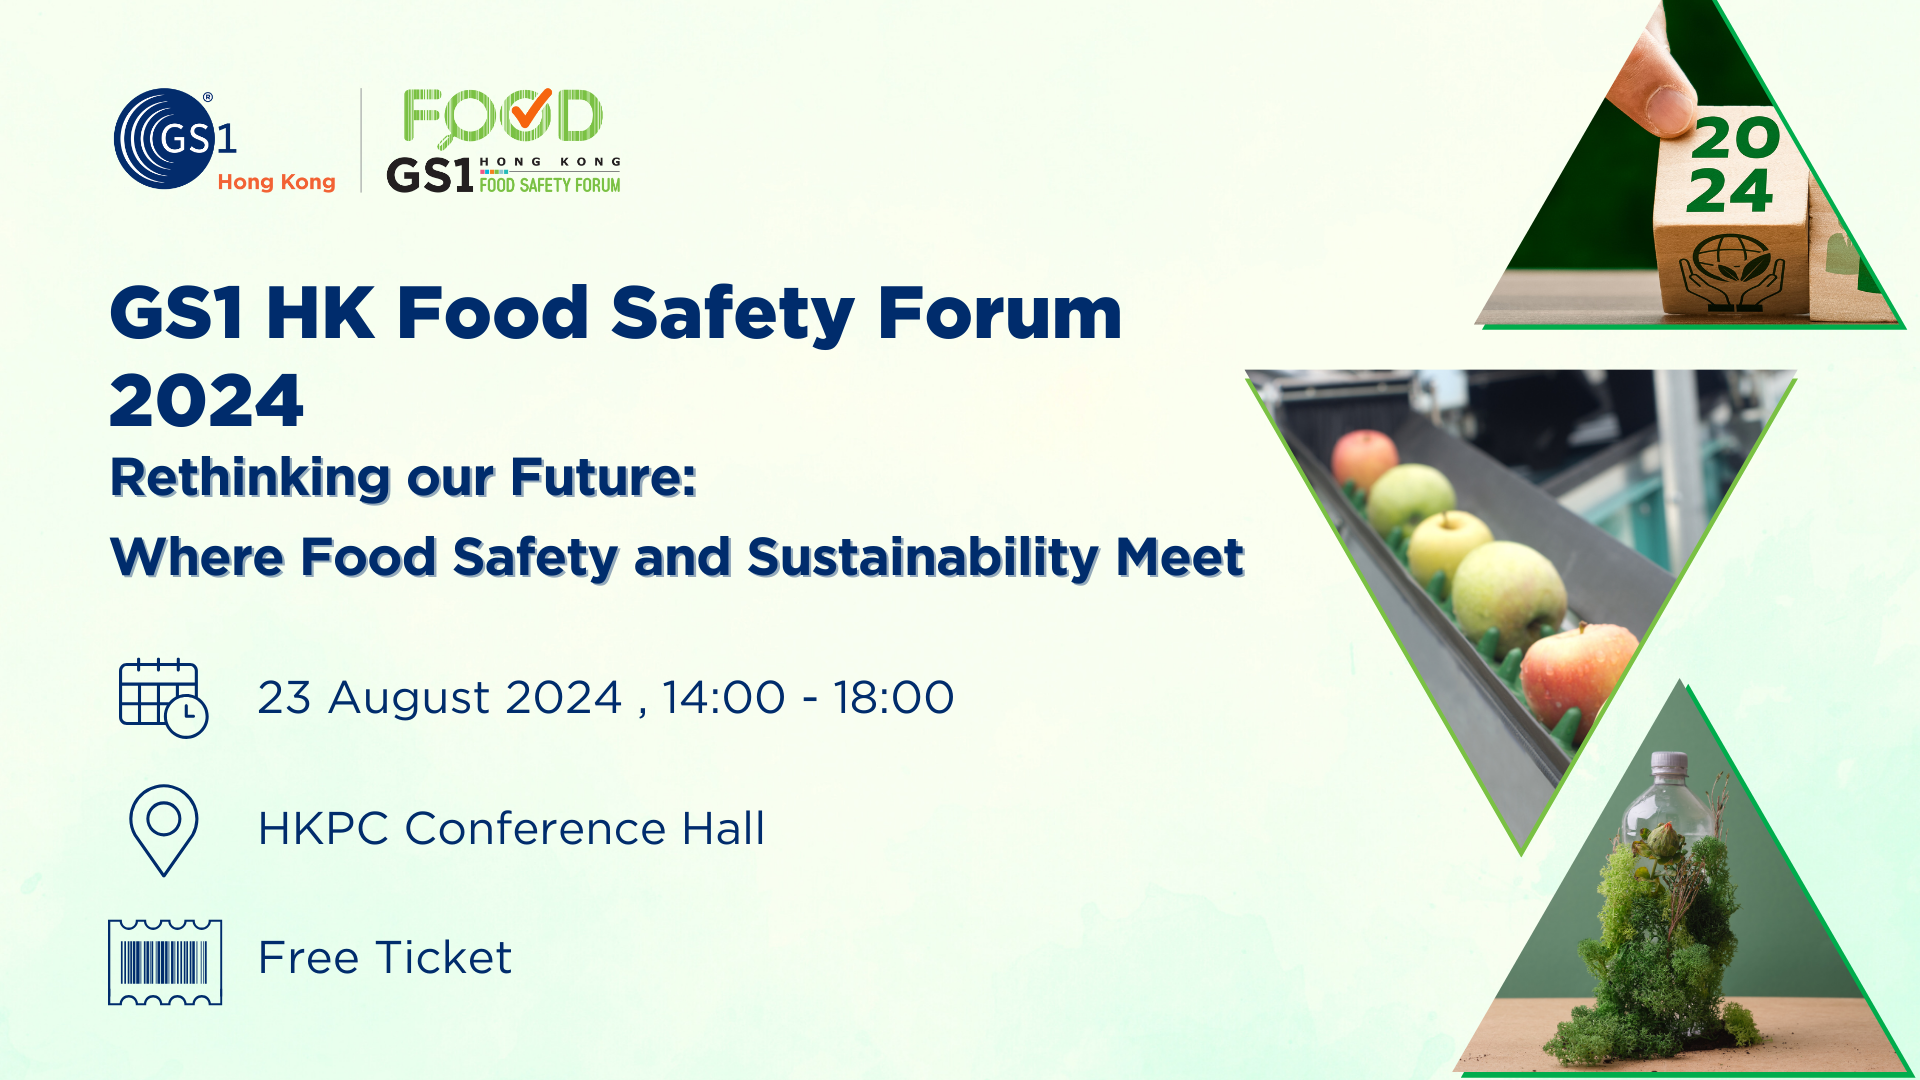 GS1 HK Food Safety Forum 2024